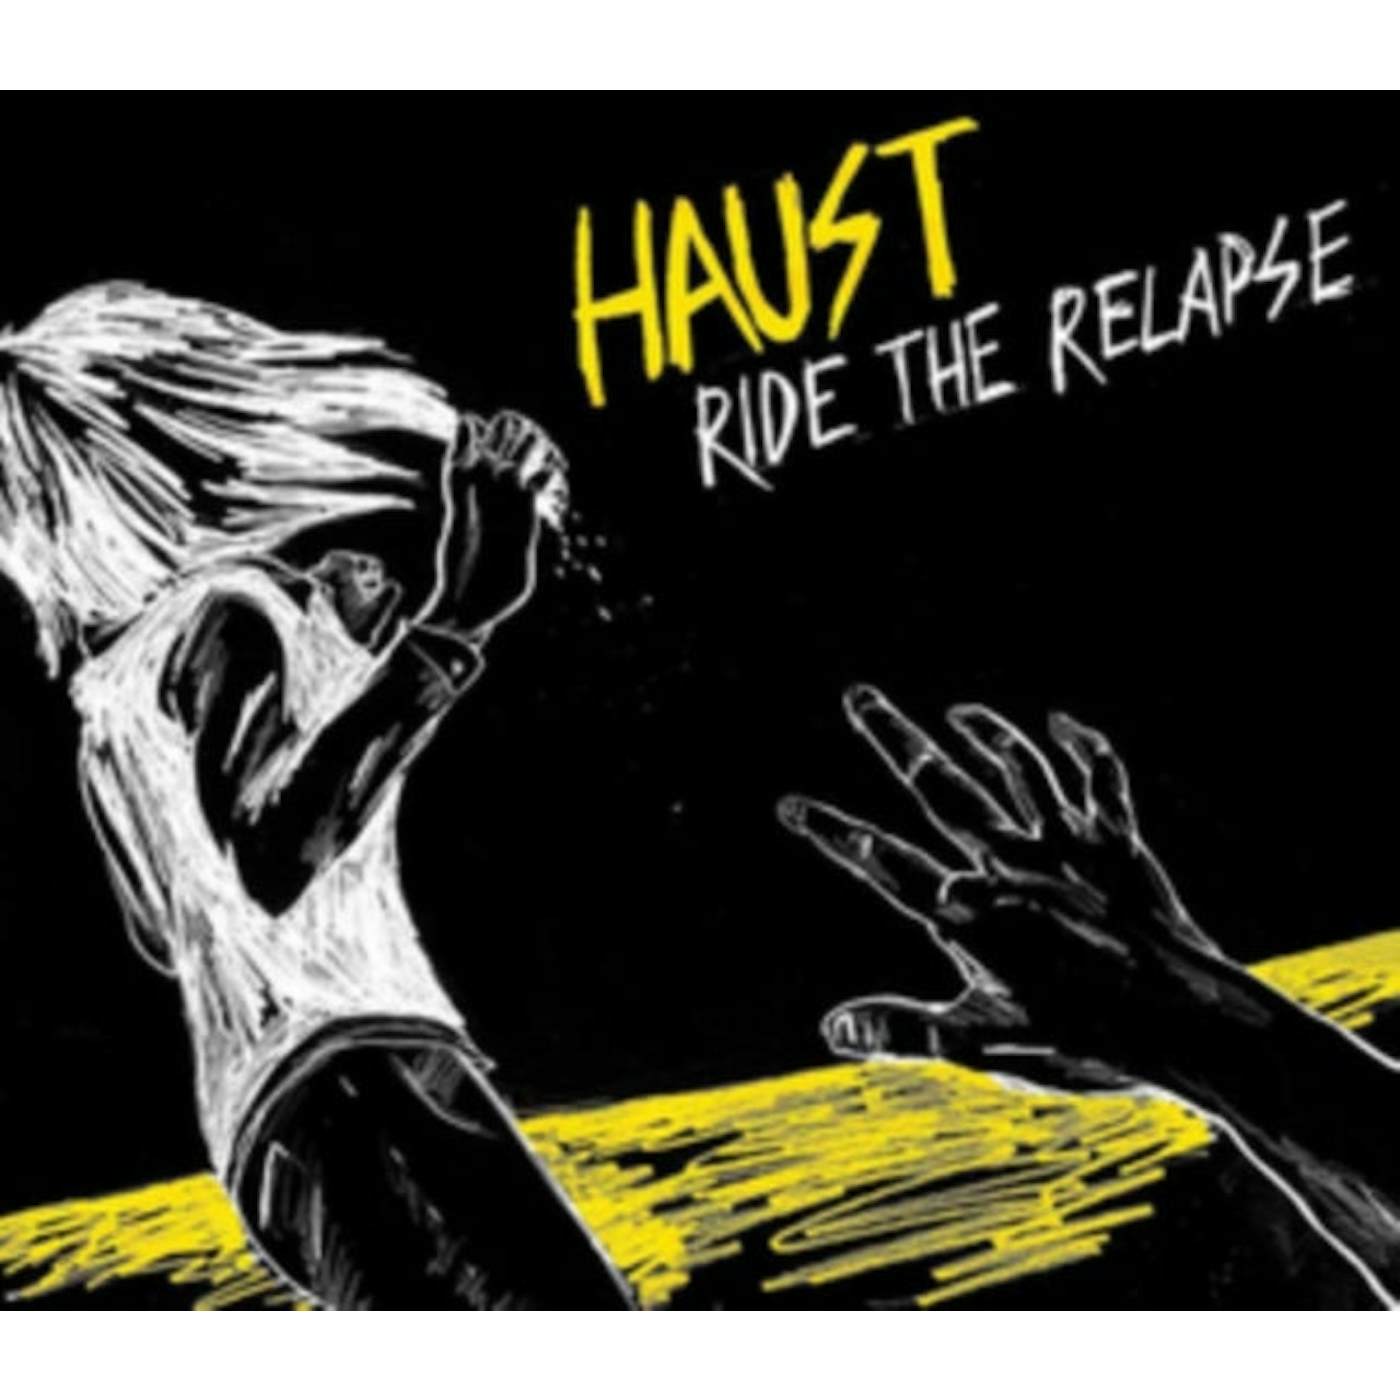 Haust CD - Ride The Relapse